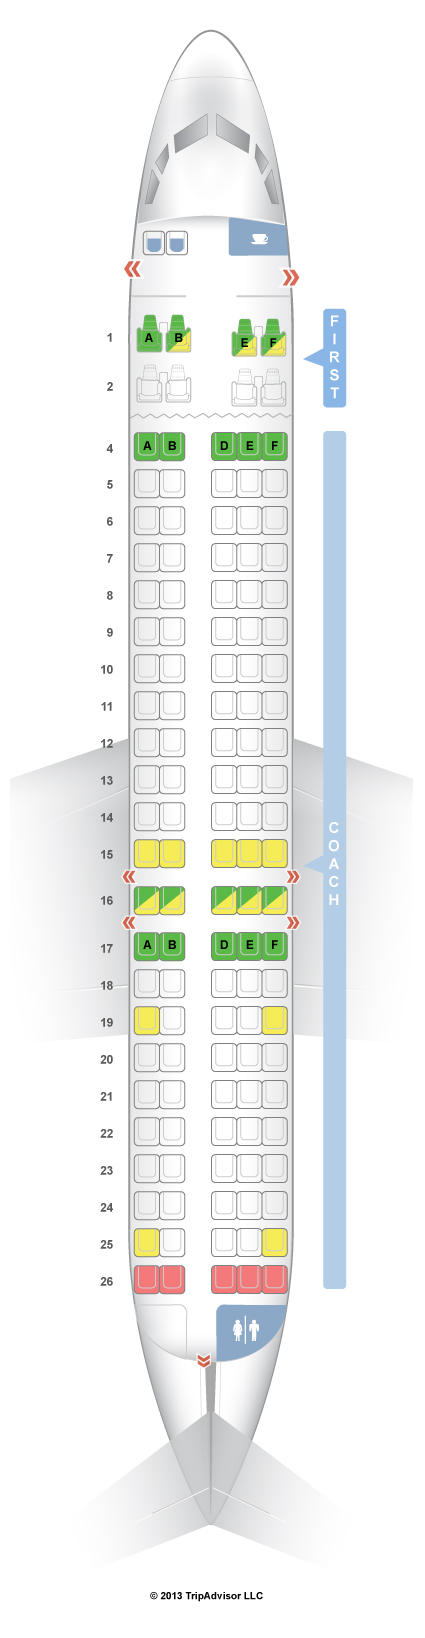 Boeing 767 Jet Seating Chart Hawaiian Airlines